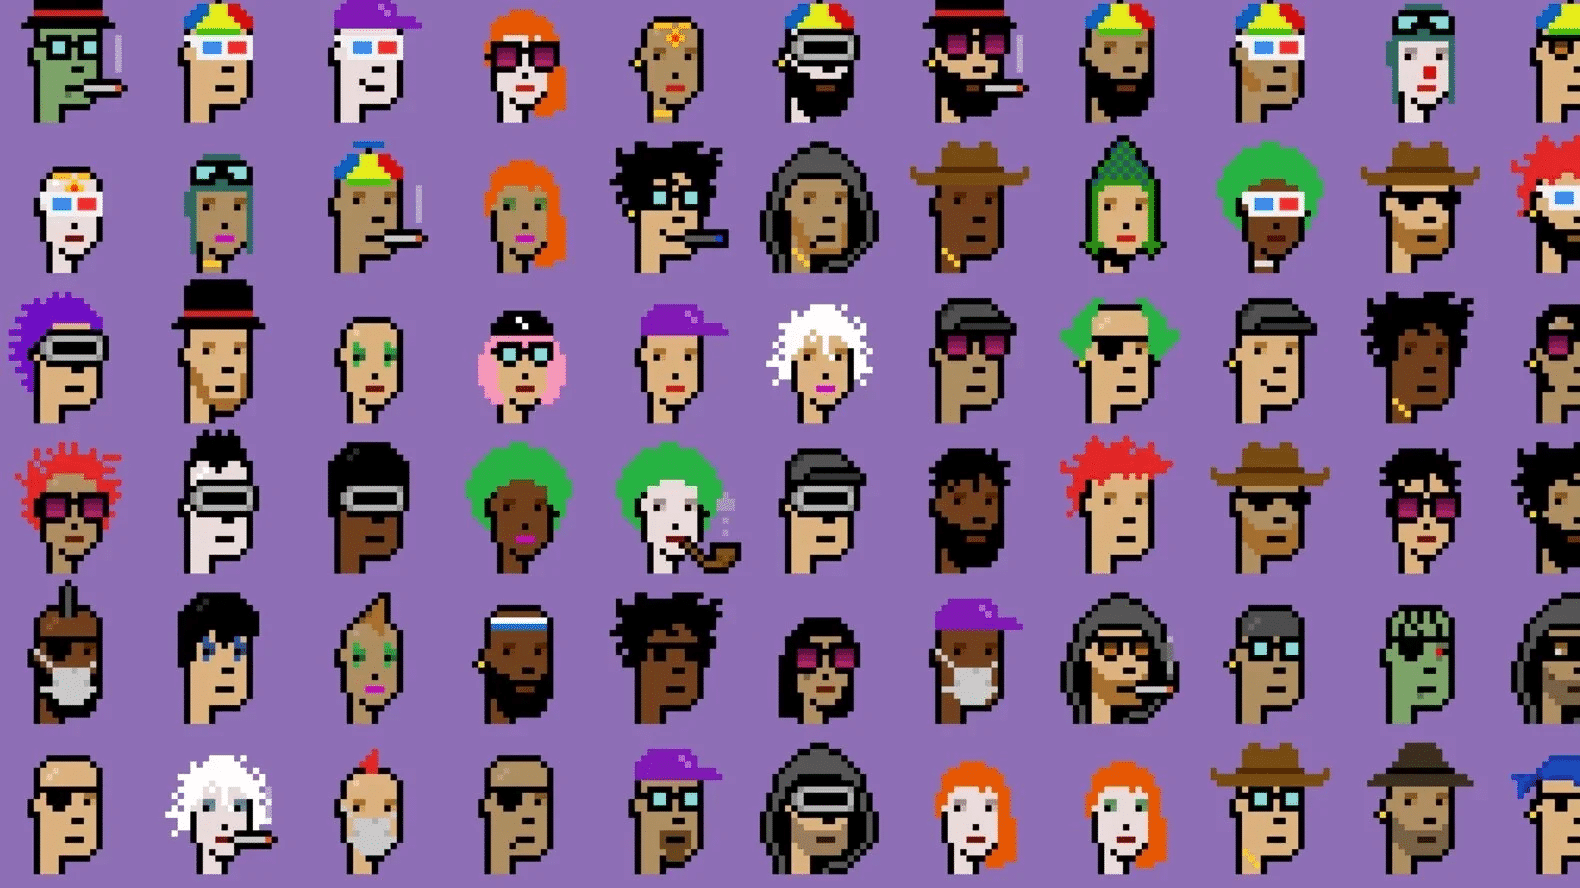 CryptoPunks and Bored Apes Club are two faces of the NFT market.